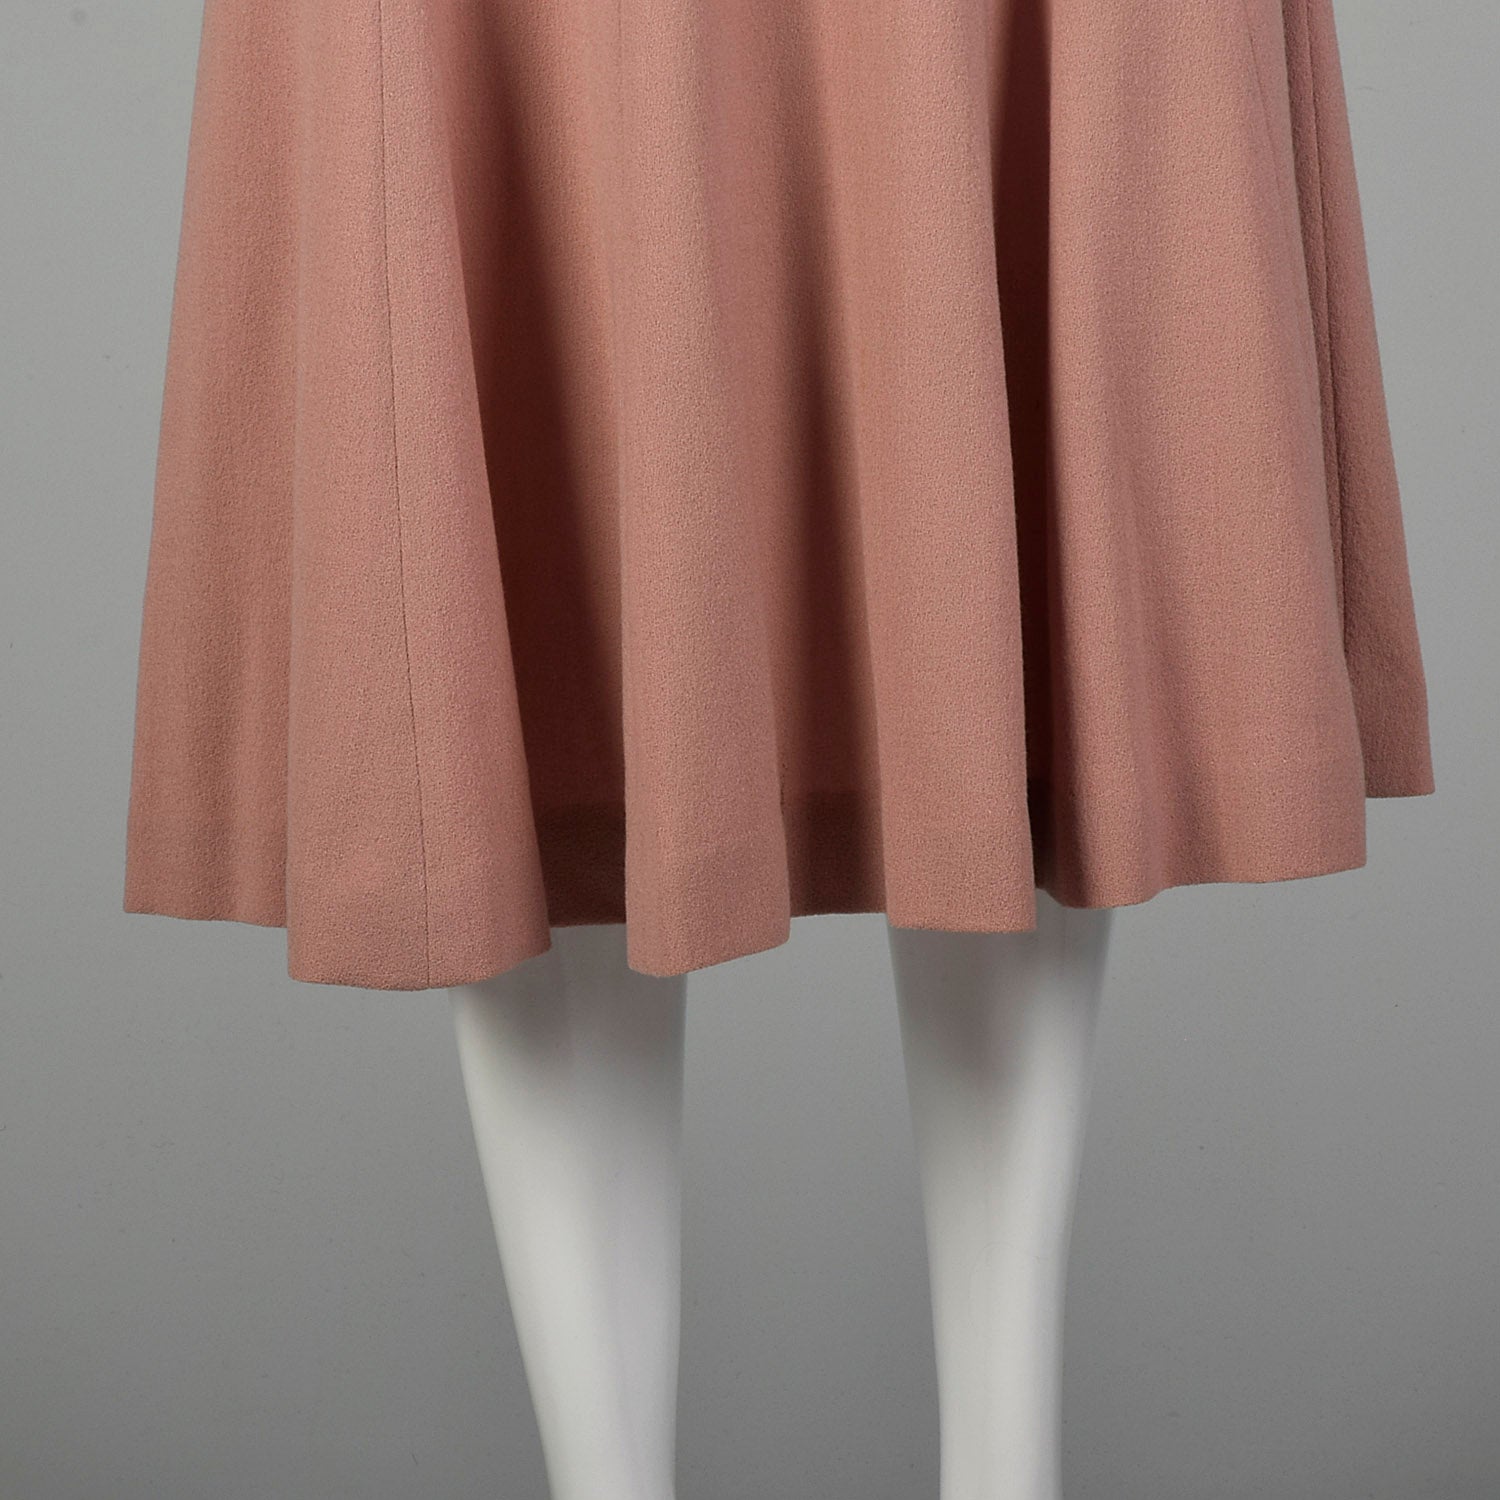 XS 1940s Dust Pink Skirt